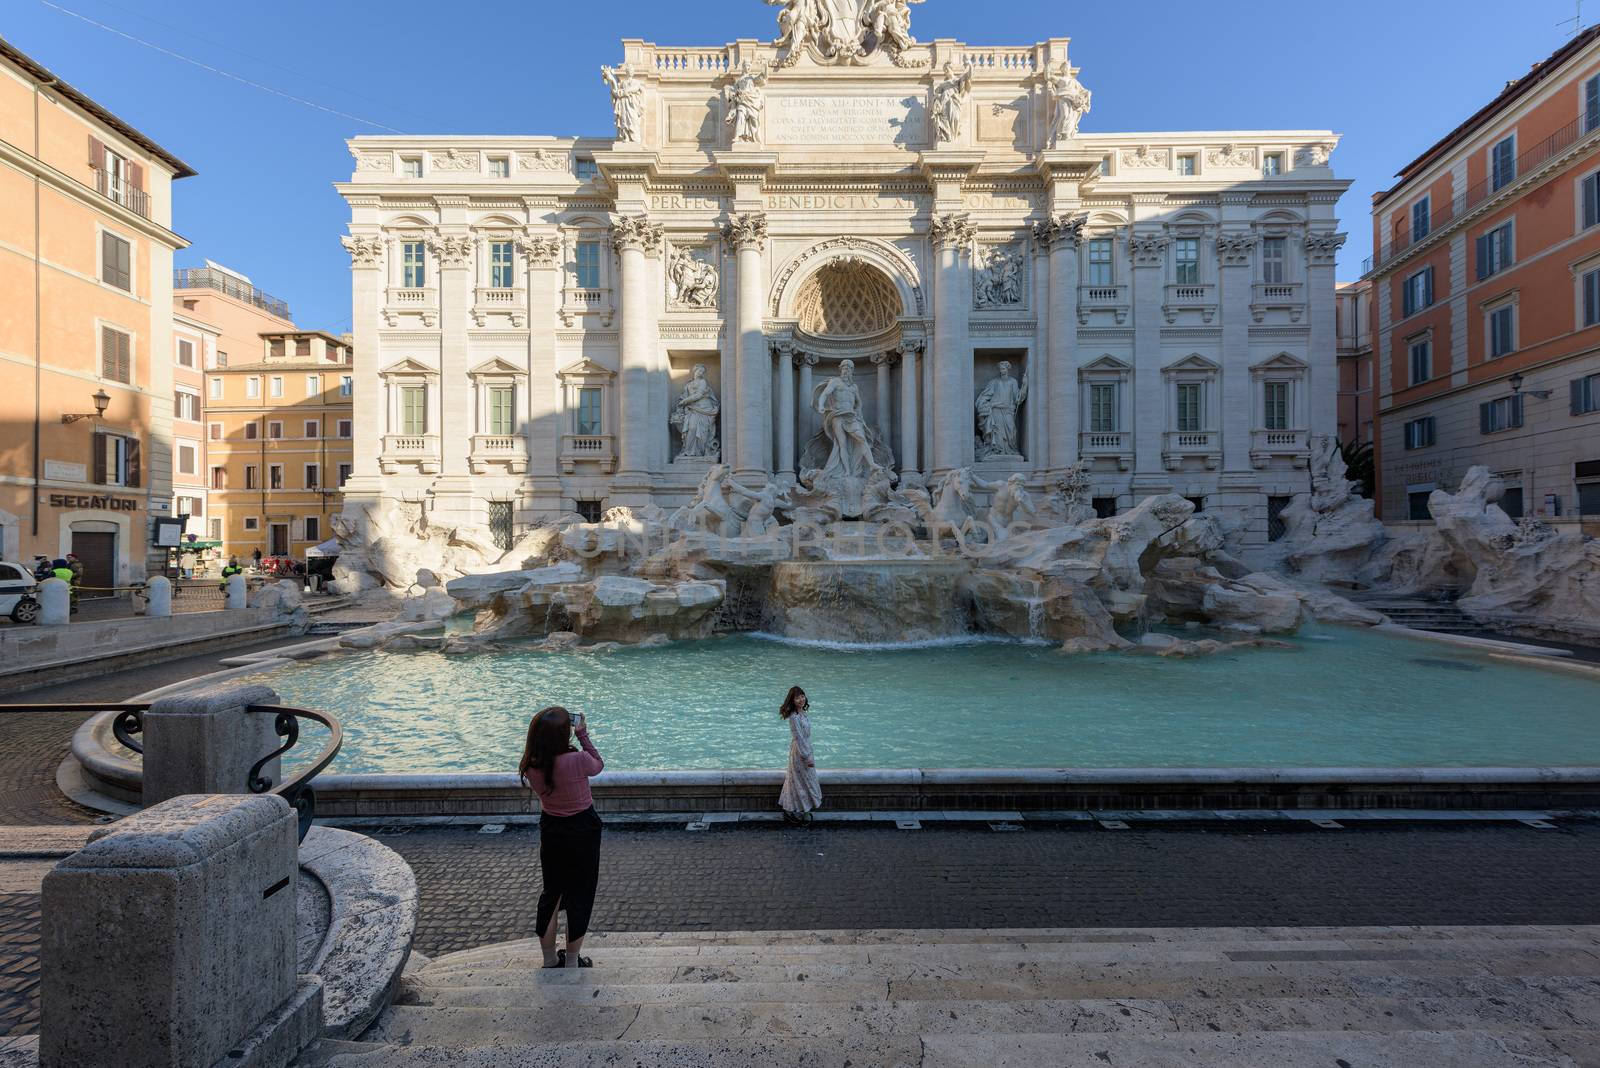 Rome, Italy - 10 March 2020: Two lone tourists take pictures in front of the deserted Trevi Fountain, a rare sight today in Rome, Italy. As of today, the Italian government decreed a nationwide quarantine, with travel and gatherings bans, limited opening hours for shops and venues, and emergency health measures following the CoVid-19 epidemic. Tourism has collapsed as a result.